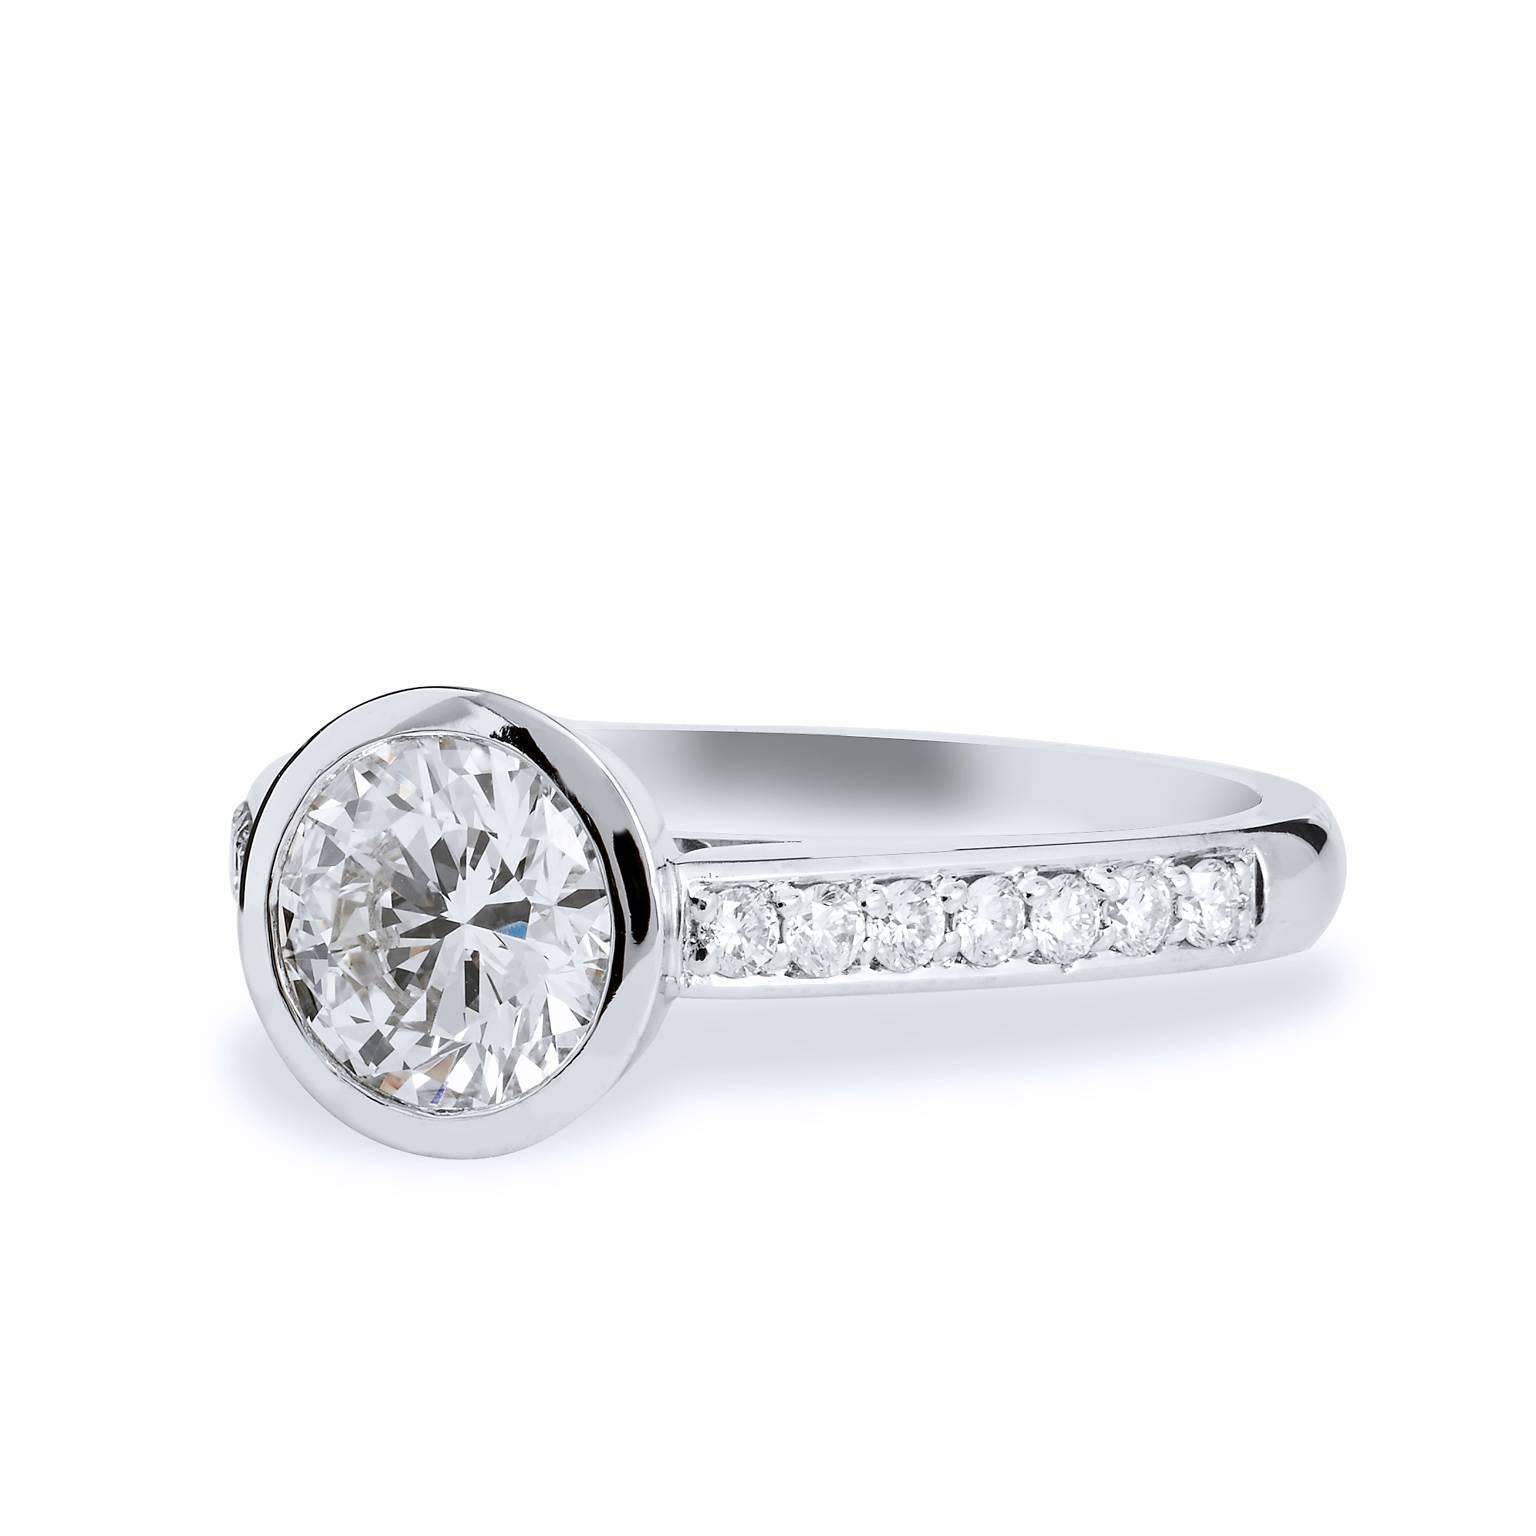 GIA Certified 1.01 carat Diamond and Pave Bezel Set Platinum Engagement Ring

This is a one of a kind, handmade ring by H&H Jewels.  
It features a 1.76 carat Bezel Set Diamond with Pave & Marquis diamonds set in Platinum 

Make a simple, elegant